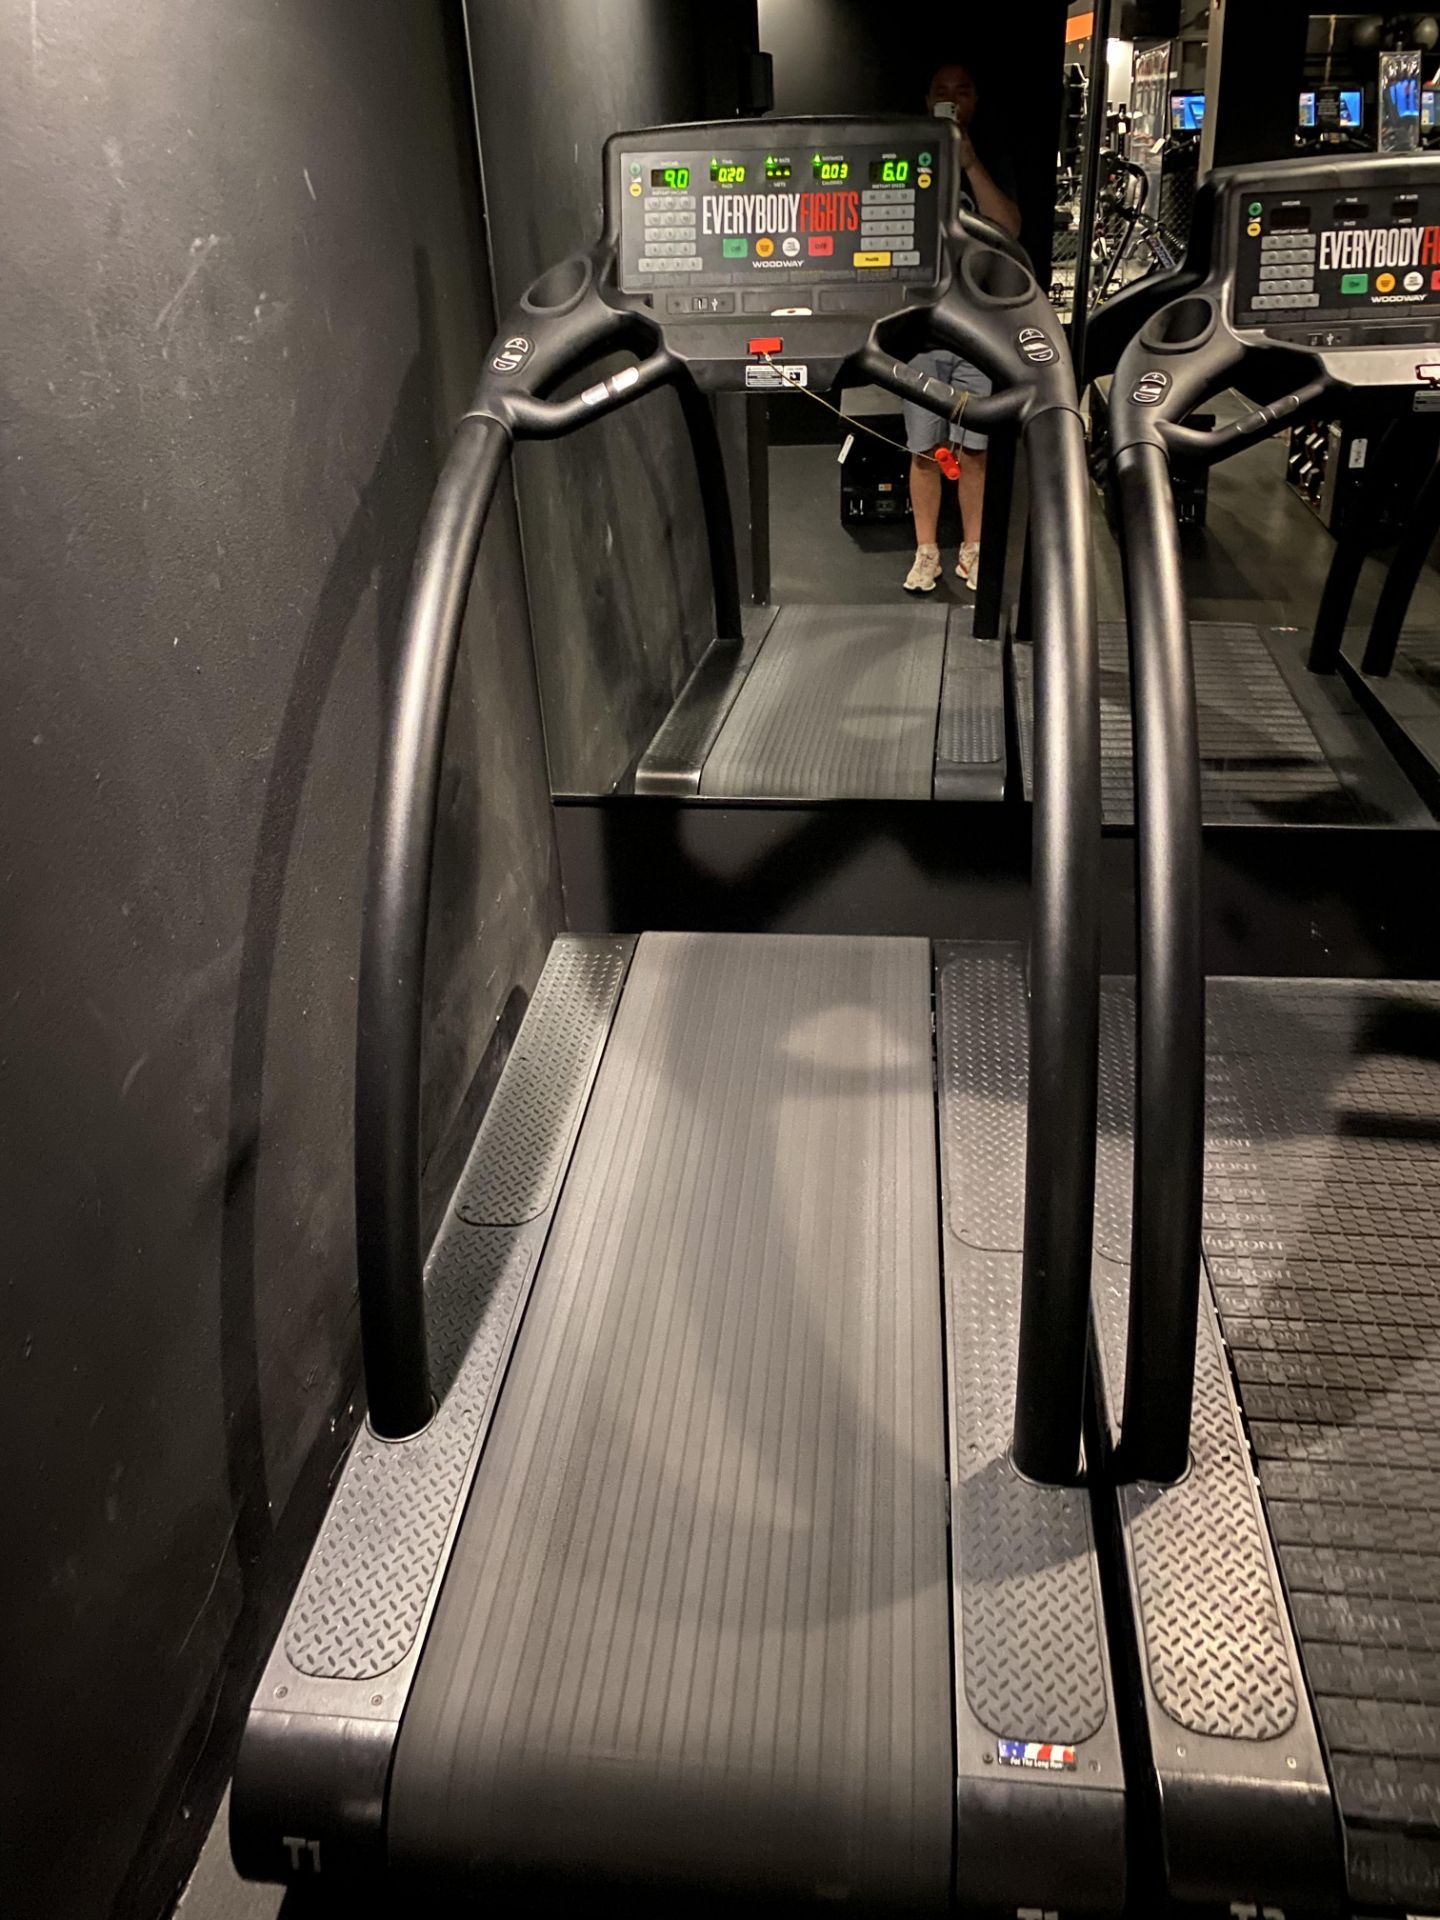 2018 Woodway 4Front Commercial Treadmill w/Quickset Display, 0-15% Elevation, Speed: 12.5 Mph, S/ - Image 3 of 3